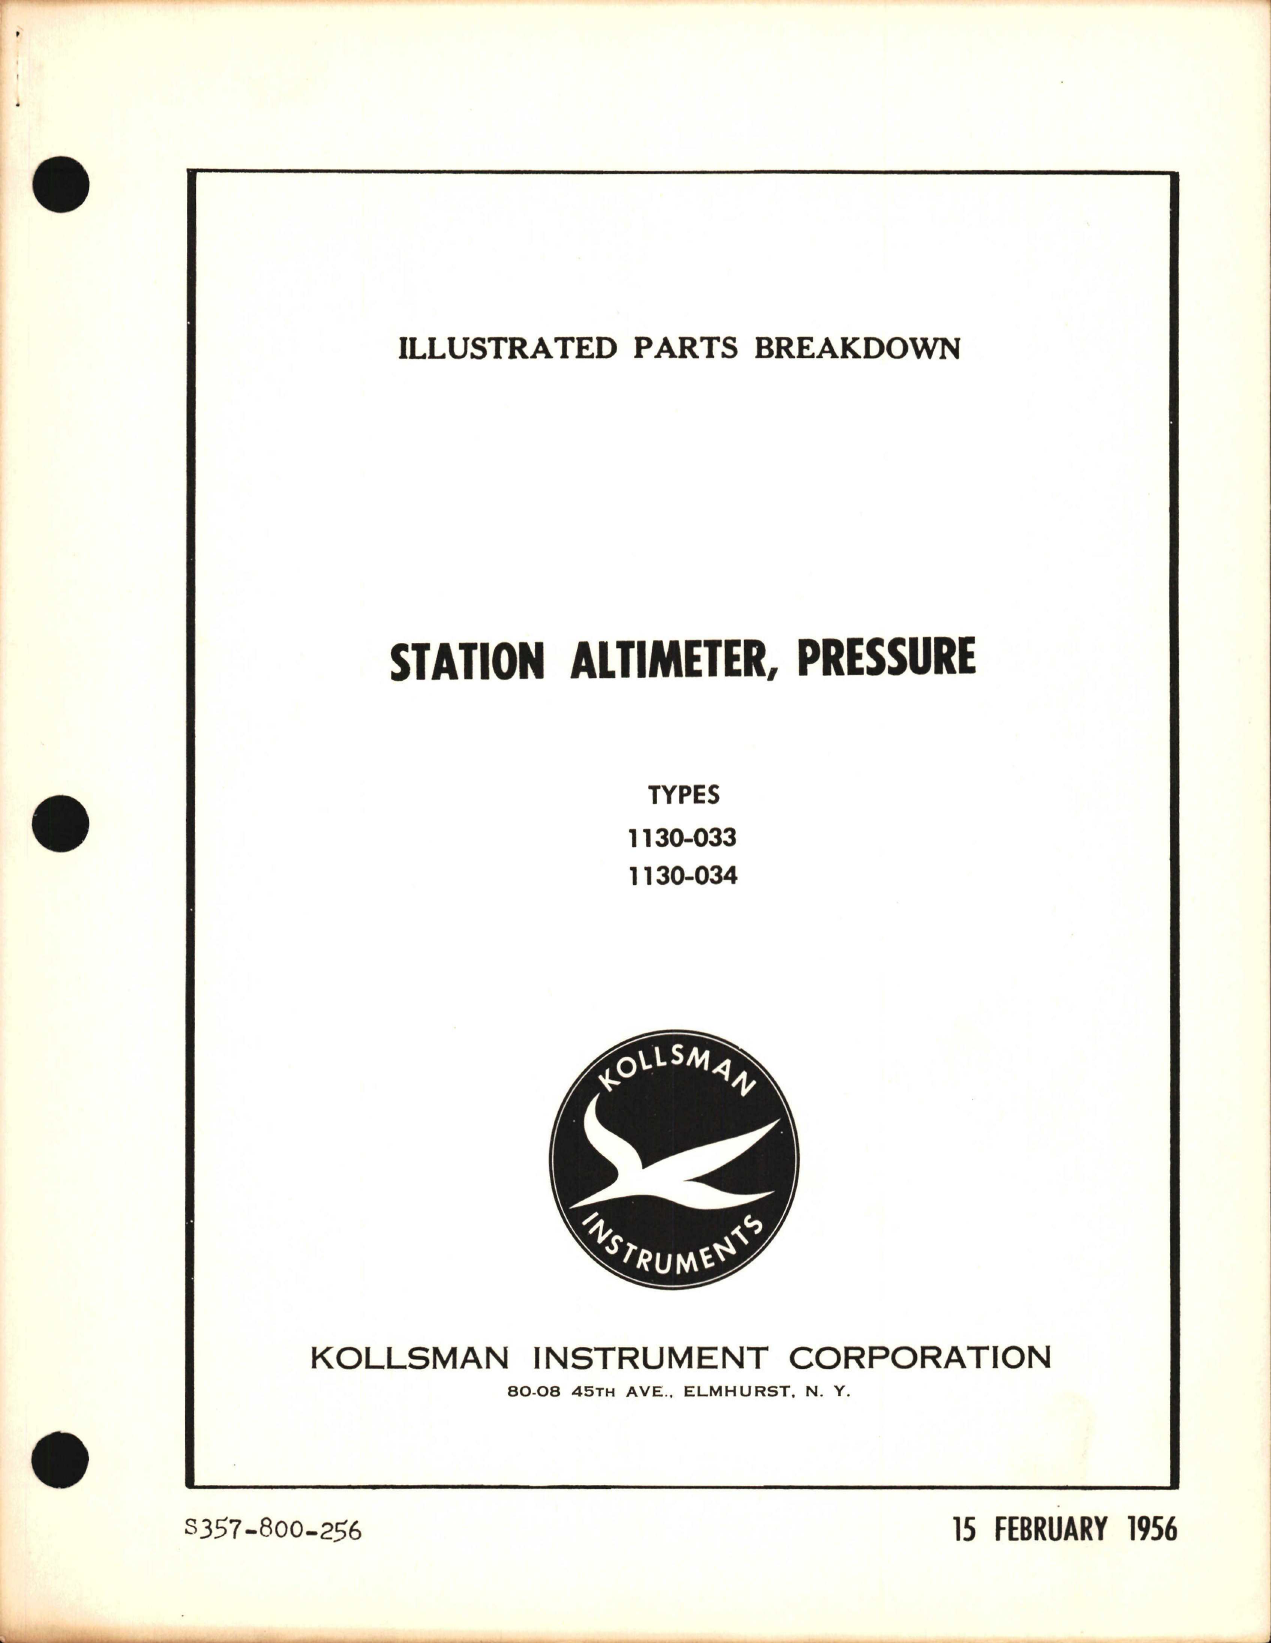 Sample page 1 from AirCorps Library document: Illustrated Parts Breakdown for Kollsman Pressure Station Altimeter